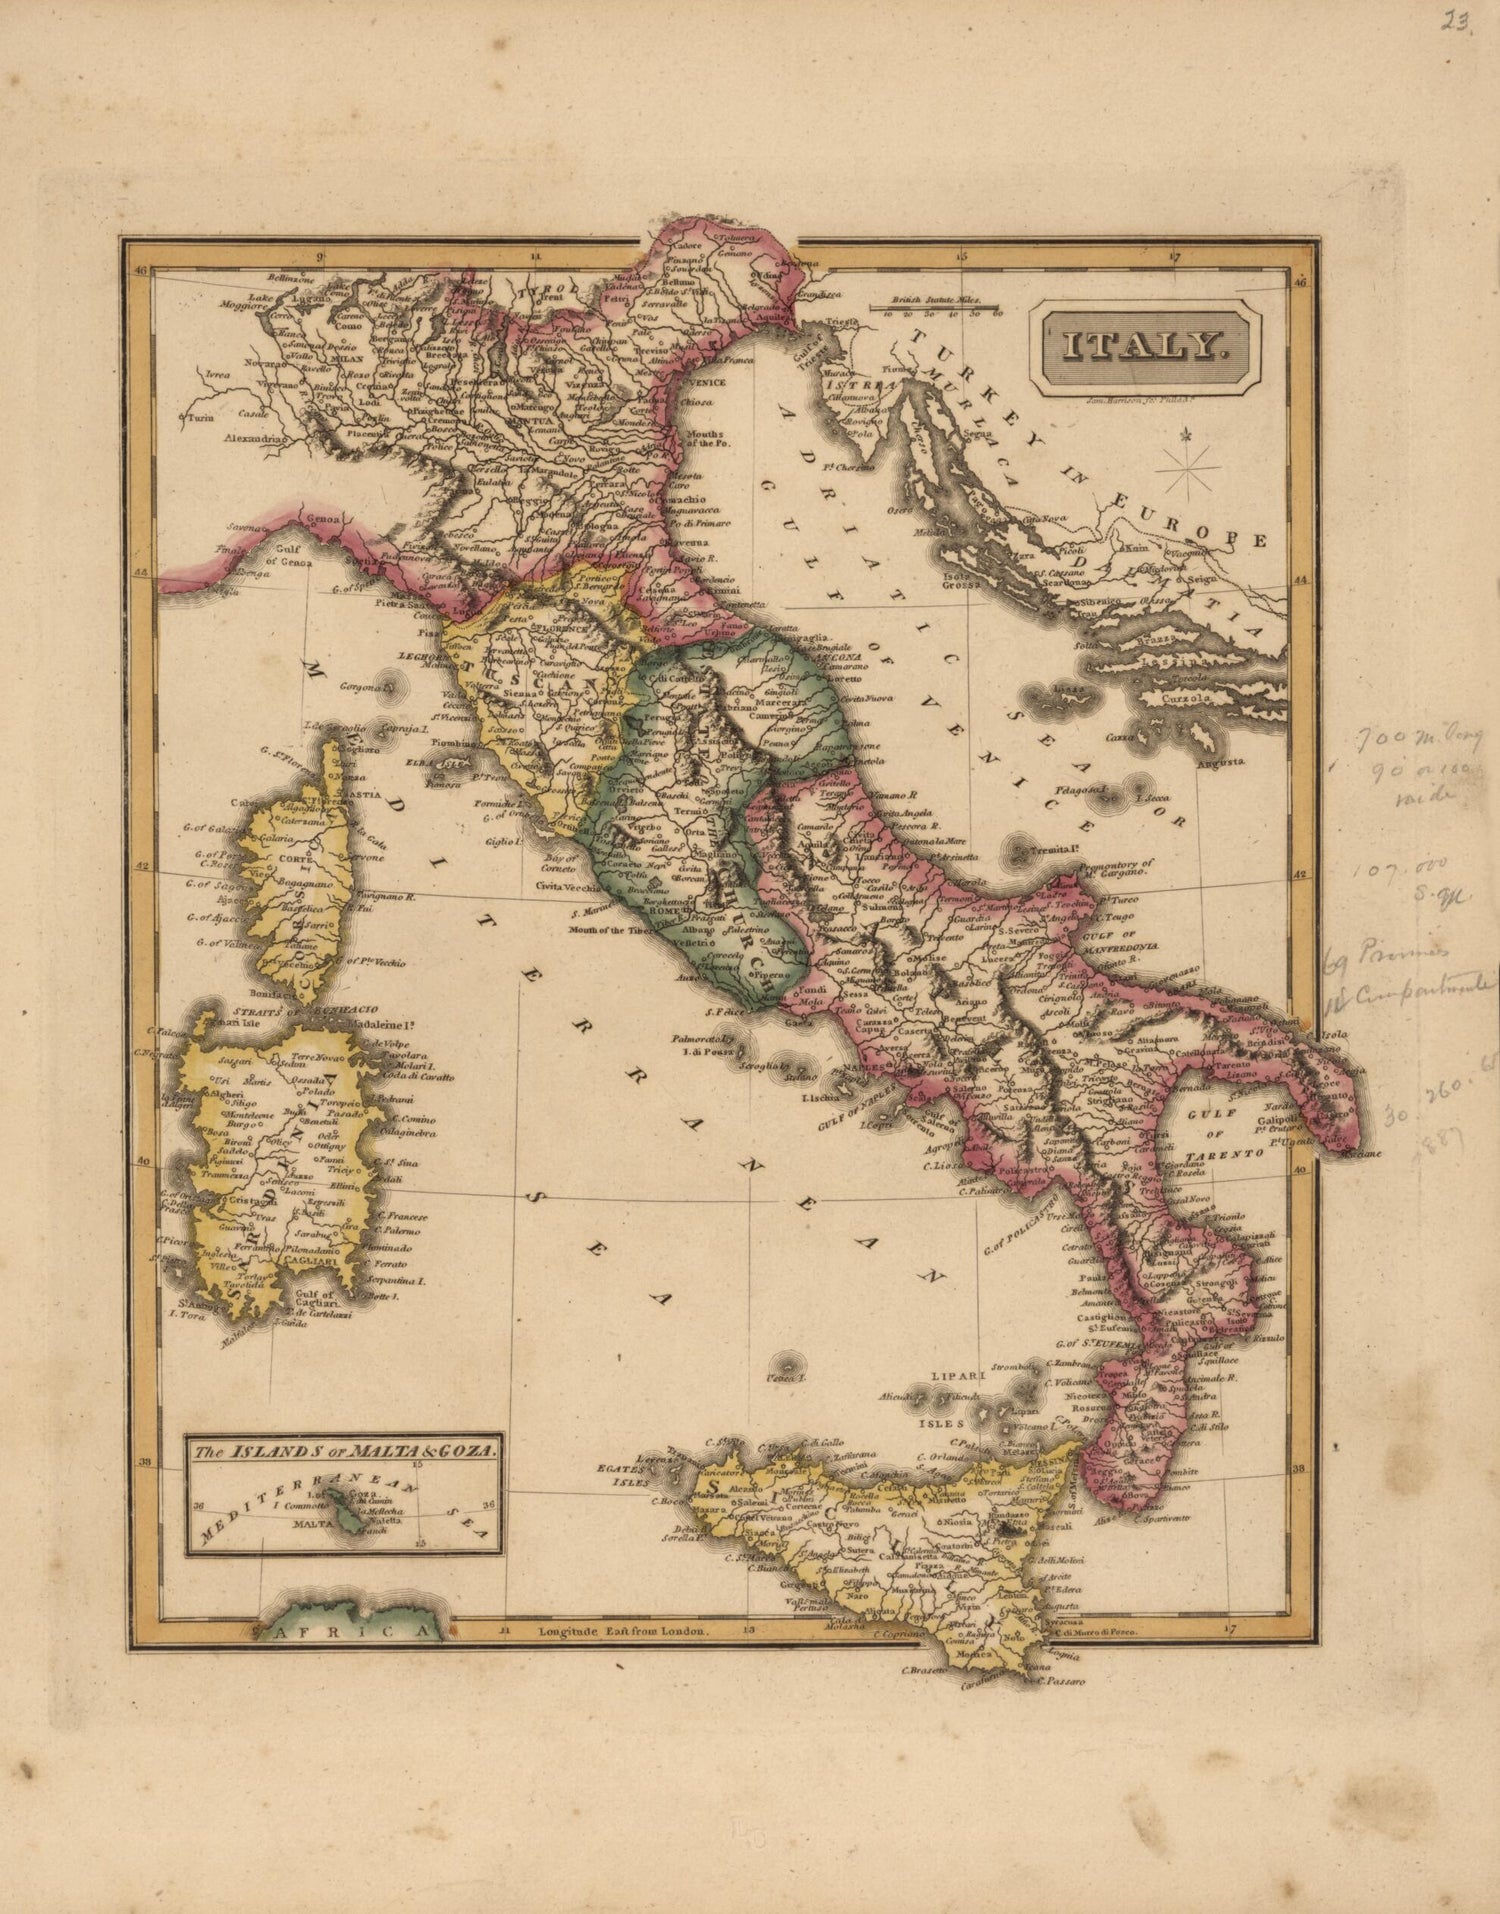 This old map of Italy from a New and Elegant General Atlas, Containing Maps of Each of the United States. from 1817 was created by Henry Schenck Tanner in 1817